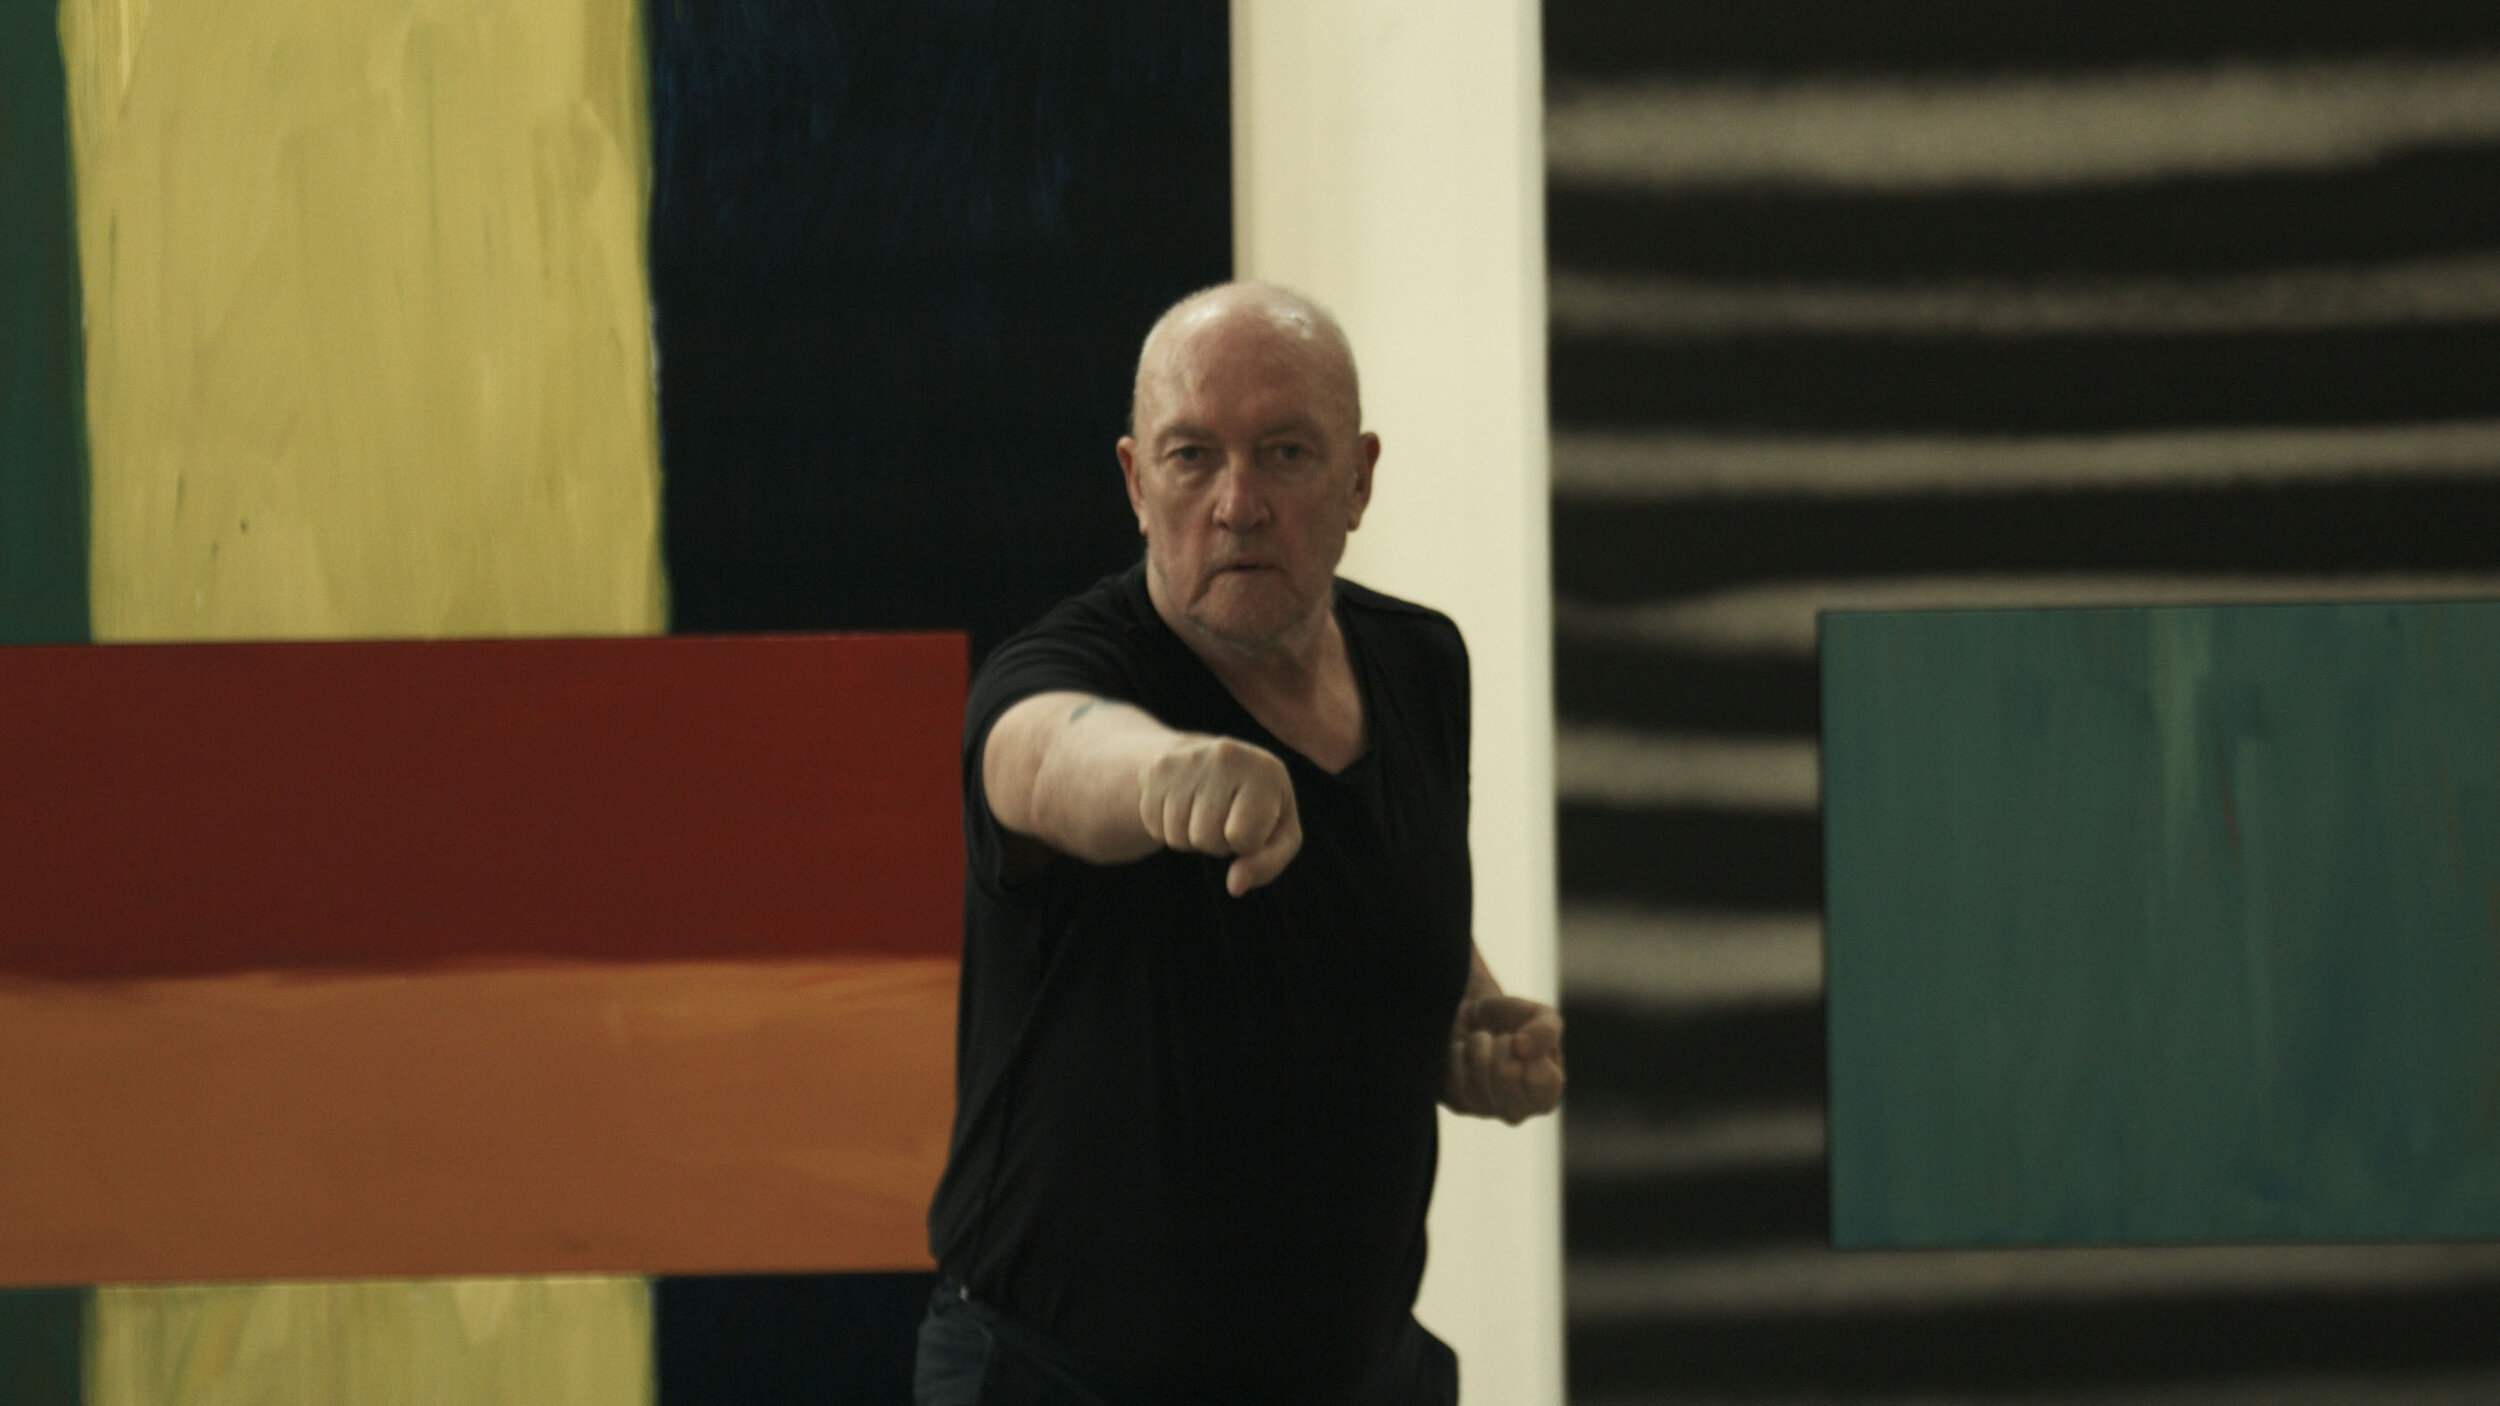 18 Sean Scully Karate workout 2 ©2018Nick Willing.jpg